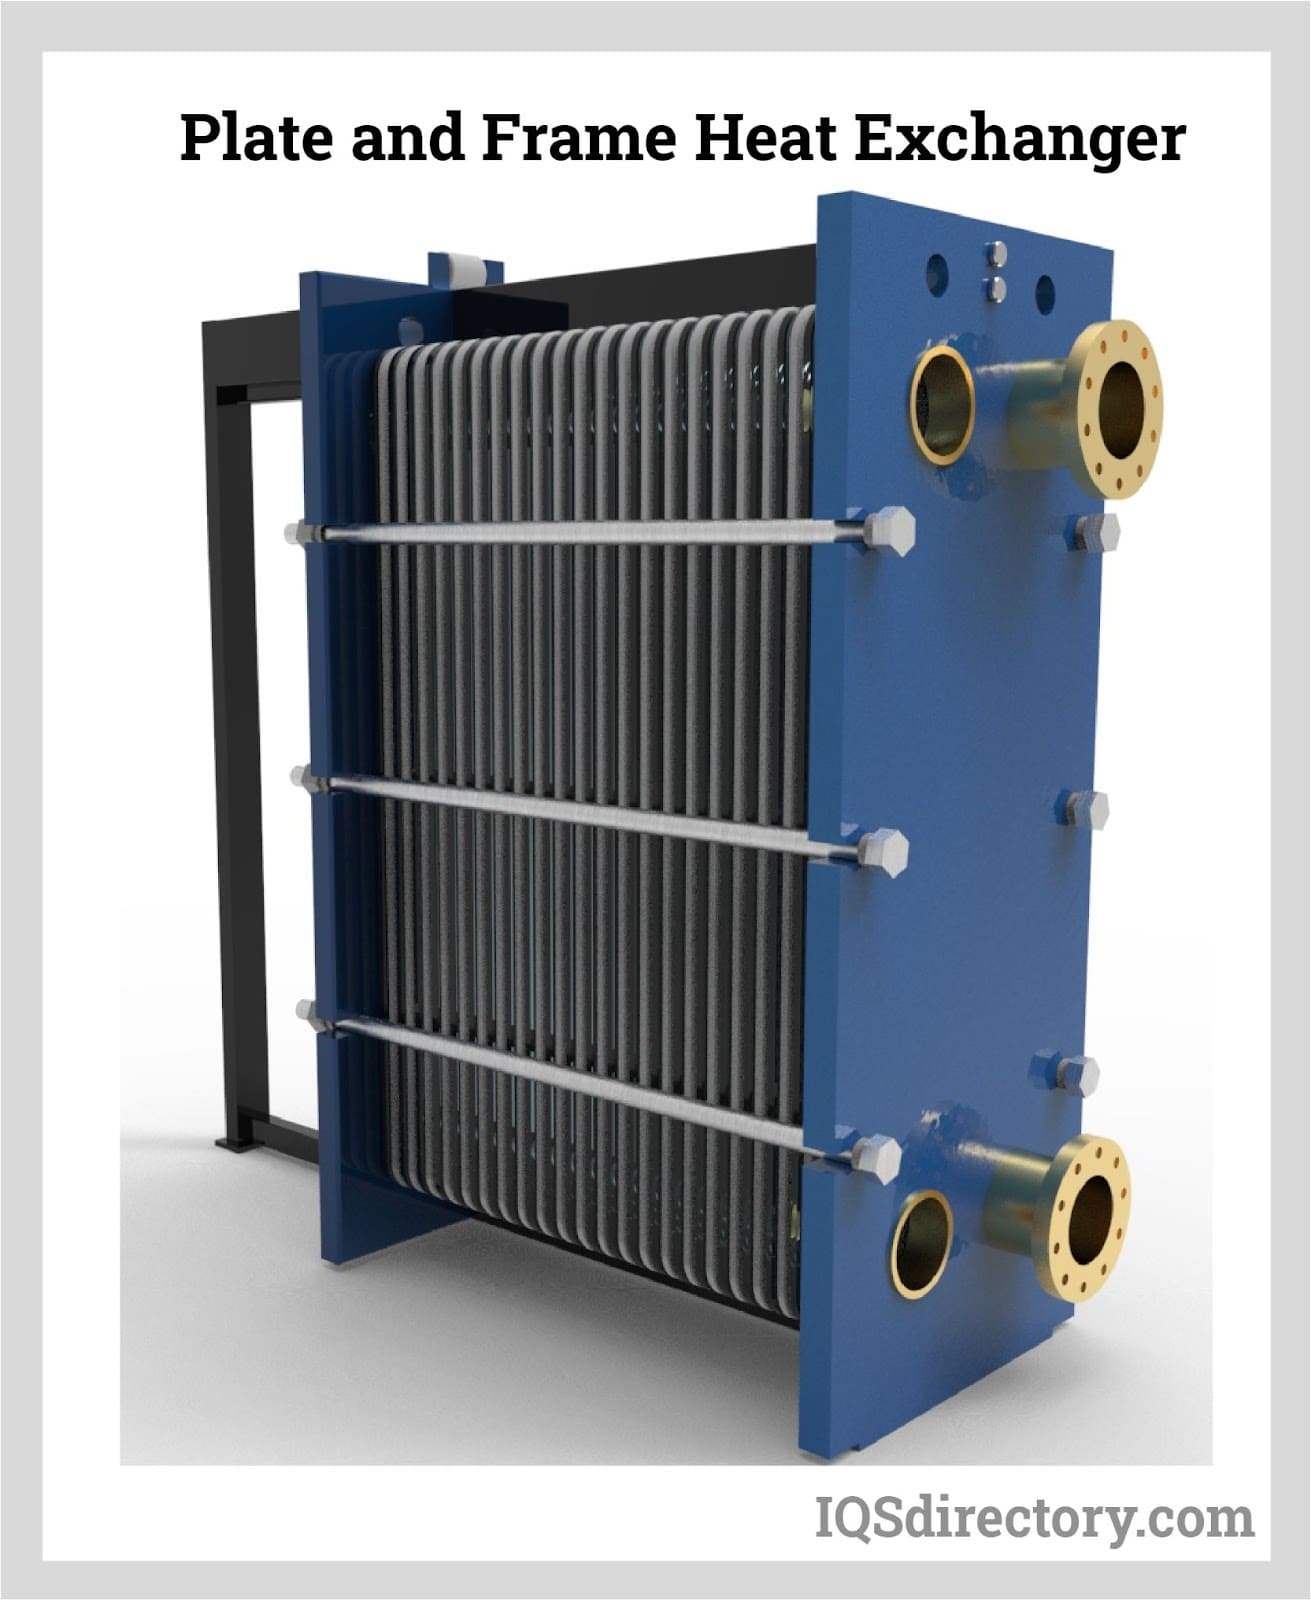 Plate and Frame Heat Exchanger